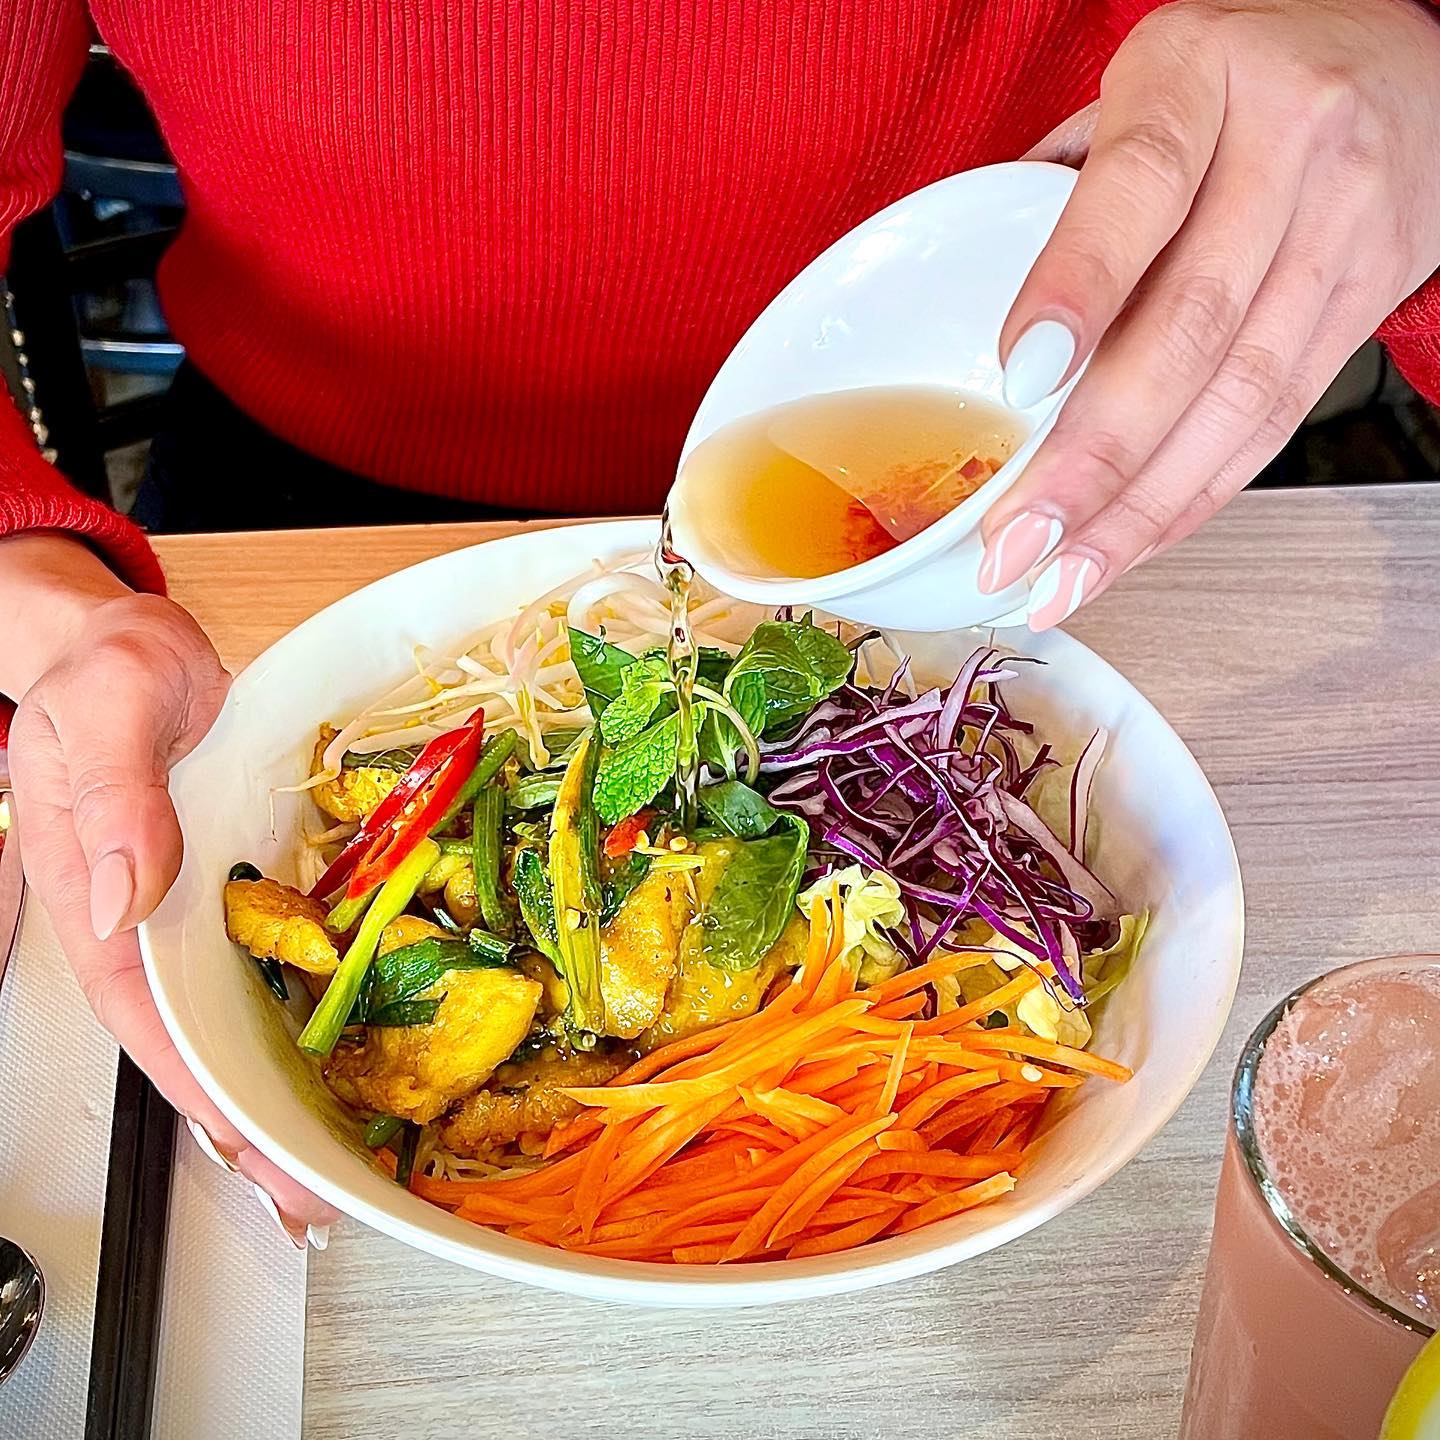 Which vermicelli bowl is your favourite? 😃
Have you tried our gluten free bun Cha Ca yet? NZ rockling fillet wok-tossed with turmeric some fresh dill and spring onions. A bowl full of colour and fresh ingredients. 😉

#glutenfree #healthyfood #freshingredients #vermicellibowl #vietnamesefood #vietnamesecuisine #vietnamesenoodles #brunswickrestaurant #sydneyrdbrunswick #melbournefoodie #melbournerestaurants